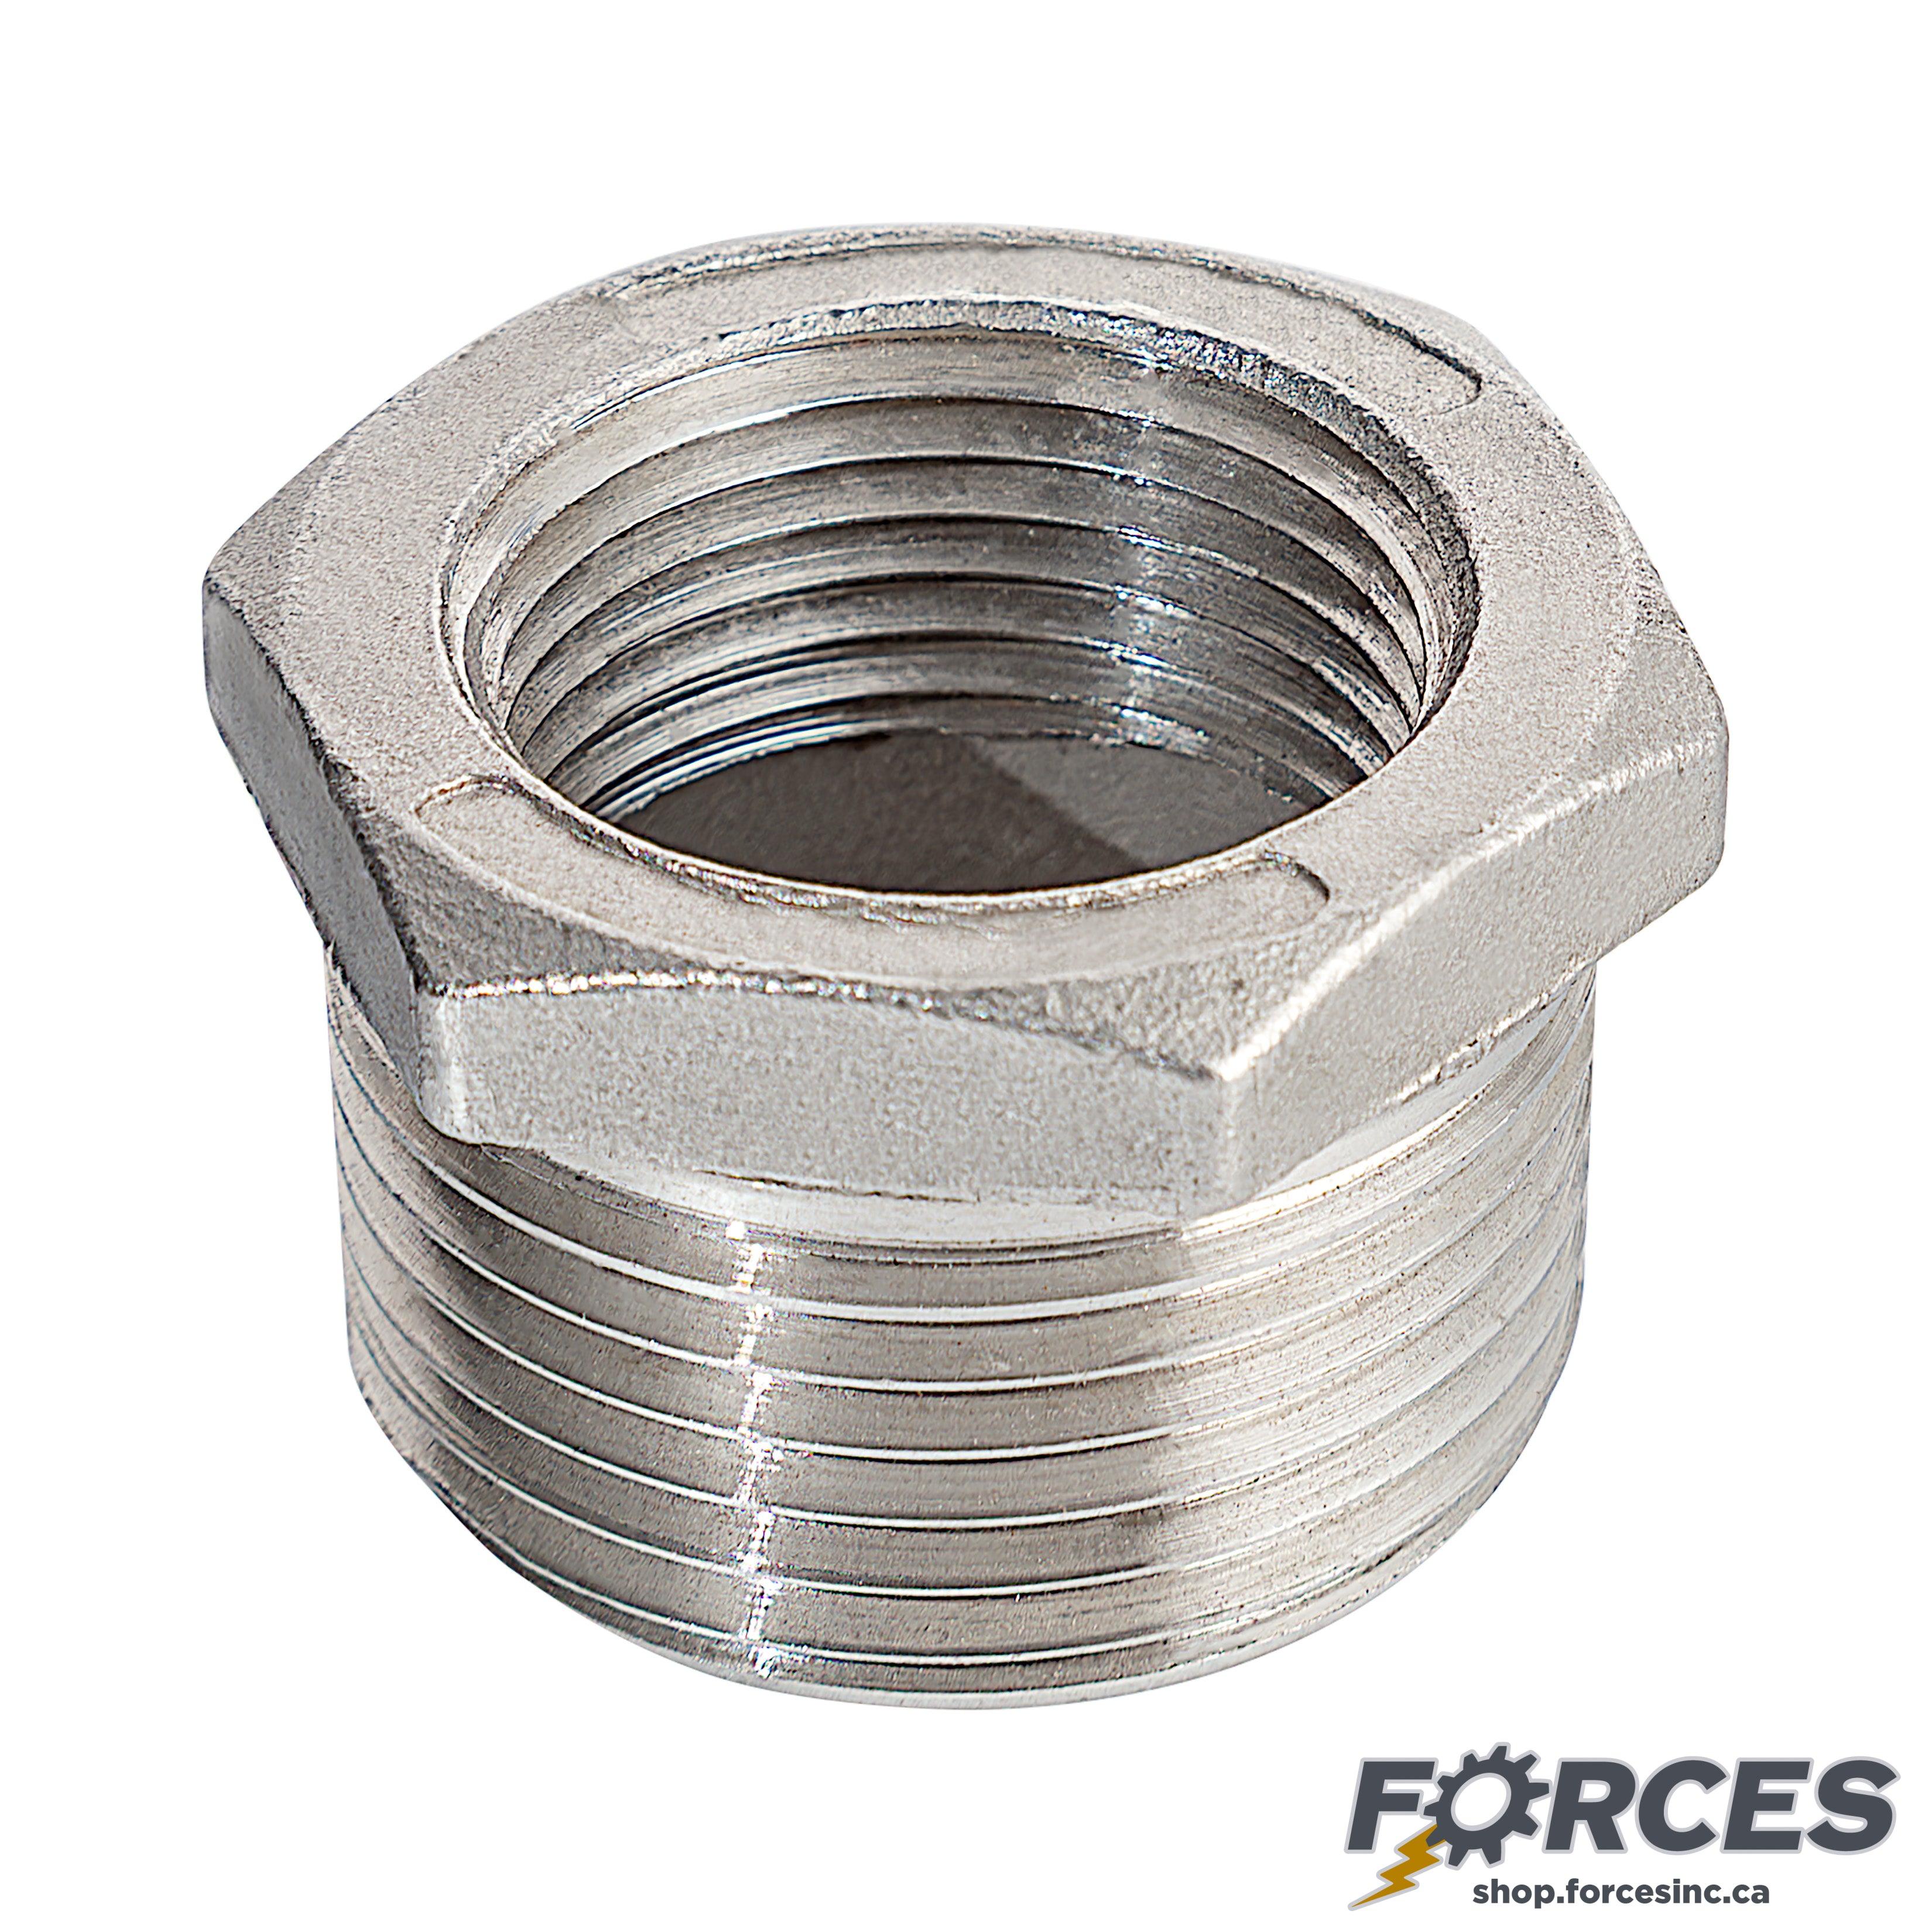 3/4" (M) x 1/2" (F) Reducing Hex Bushing NPT #150 - Stainless Steel 316 - Forces Inc